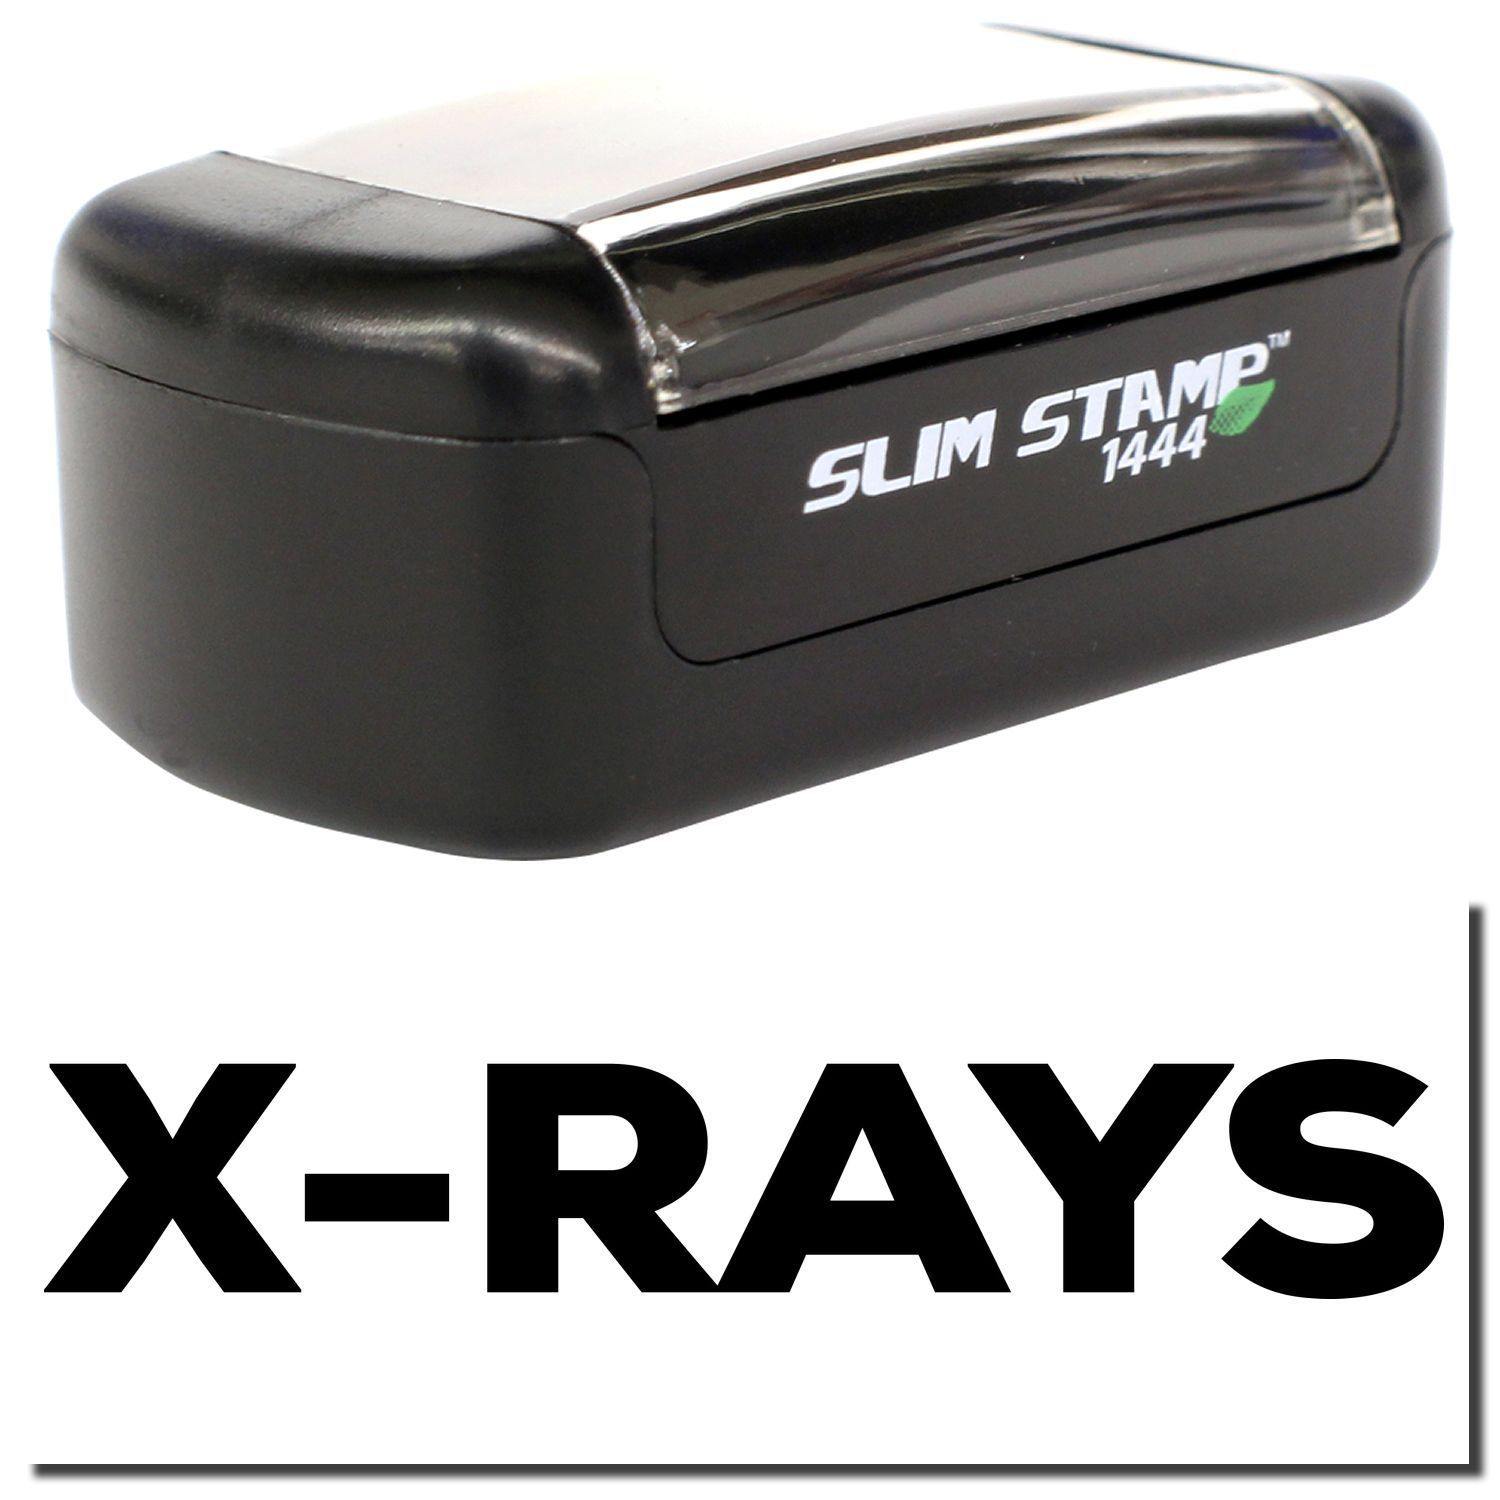 A stock office pre-inked stamp with a stamped image showing how the text "X-RAYS" in bold font is displayed after stamping.